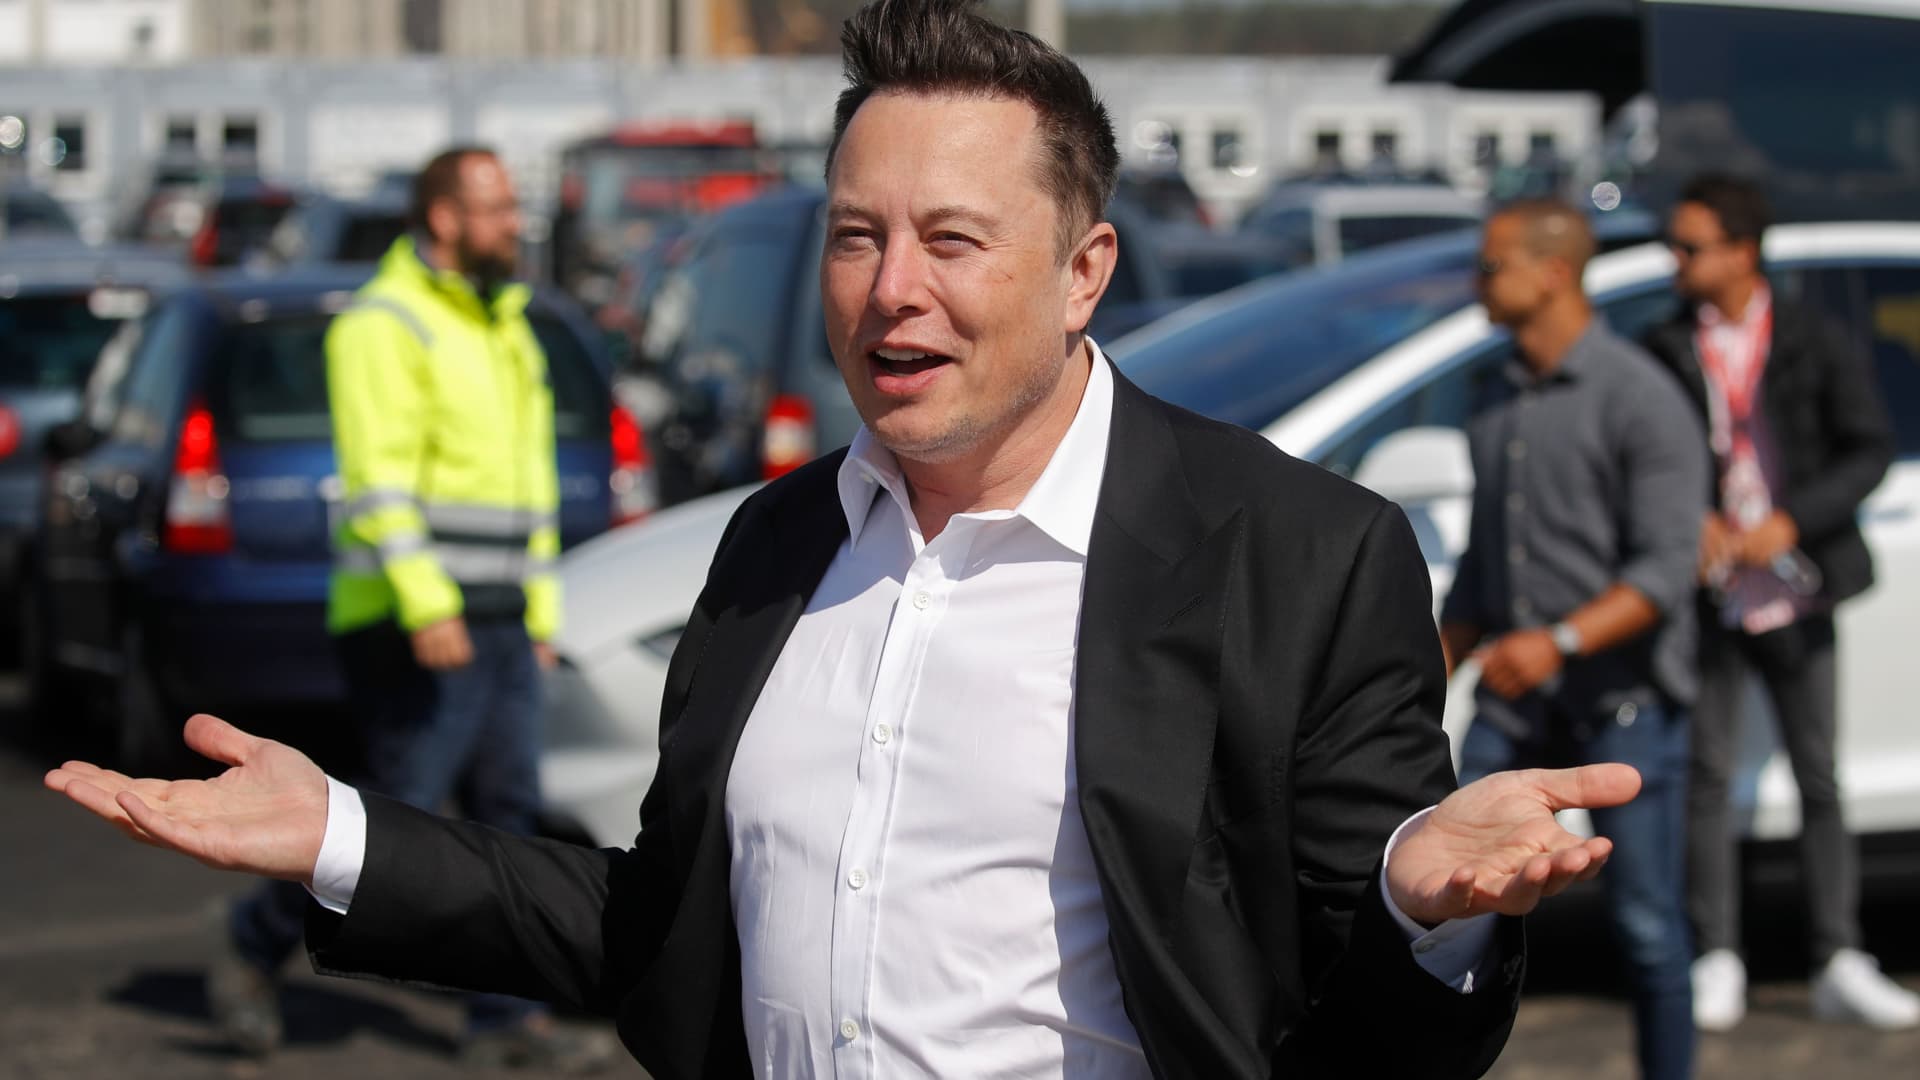 Tesla CEO Elon Musk gestures as he arrives to visit the construction site of the future US electric car giant Tesla, on September 03, 2020 in Gruenheide near Berlin.